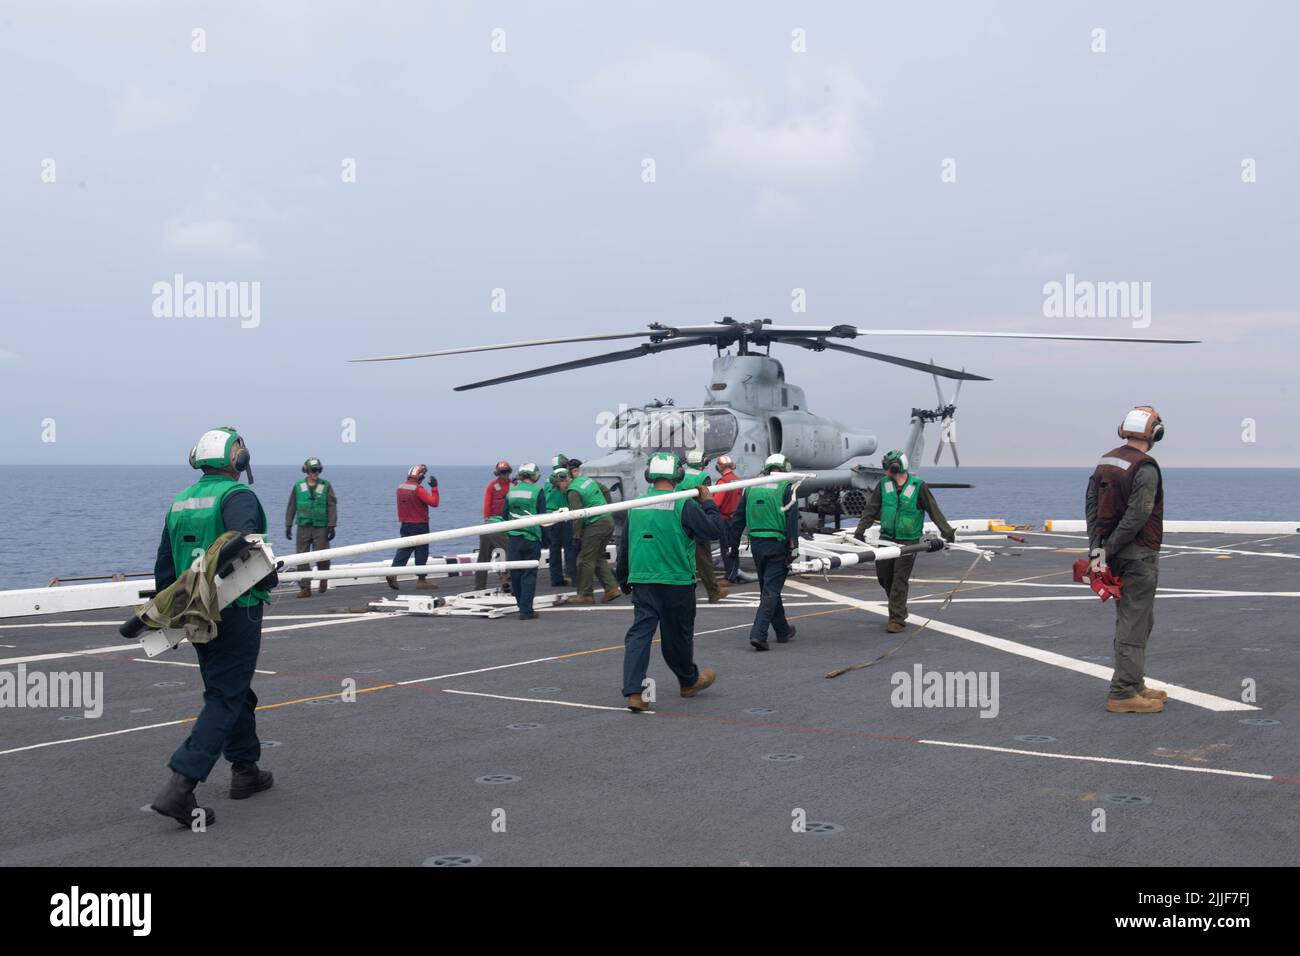 220725-N-XB010-1007 SOUTH CHINA SEA (July 25, 2022) Sailors assigned to the forward-deployed amphibious transport dock ship USS New Orleans’ (LPD 18) and Marines assigned to the 31st Marine Expeditionary Unit (MEU) approach a AH-1Z Cobra helicopter with a blade fold rack on New Orleans’ flight deck. New Orleans, part of the Tripoli Amphibious Ready Group, along with the 31st MEU, is operating in the U.S. 7th Fleet area of responsibility to enhance interoperability with allies and partners and serve as a ready response force to defend peace and stability in the Indo-Pacific region. (U.S. Navy p Stock Photo